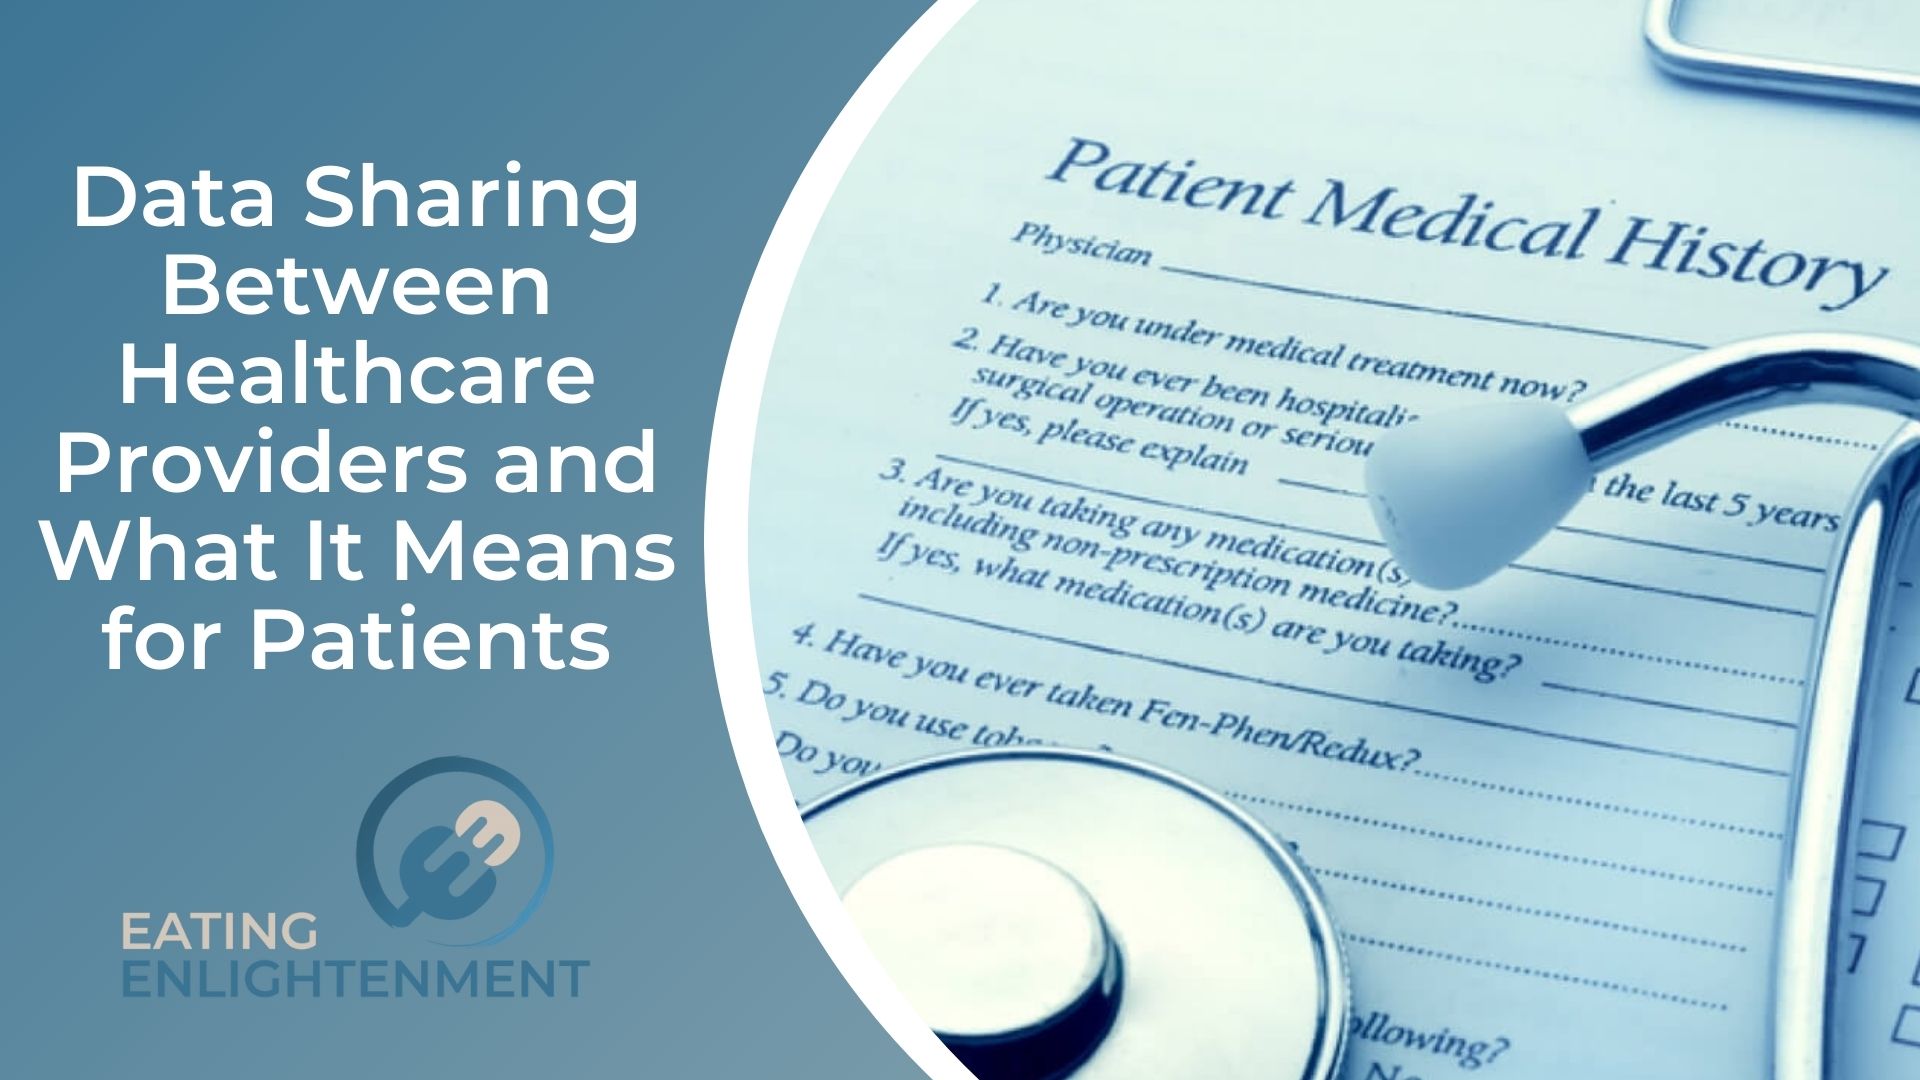 Data Sharing Between Healthcare Providers and What It Means for Patients